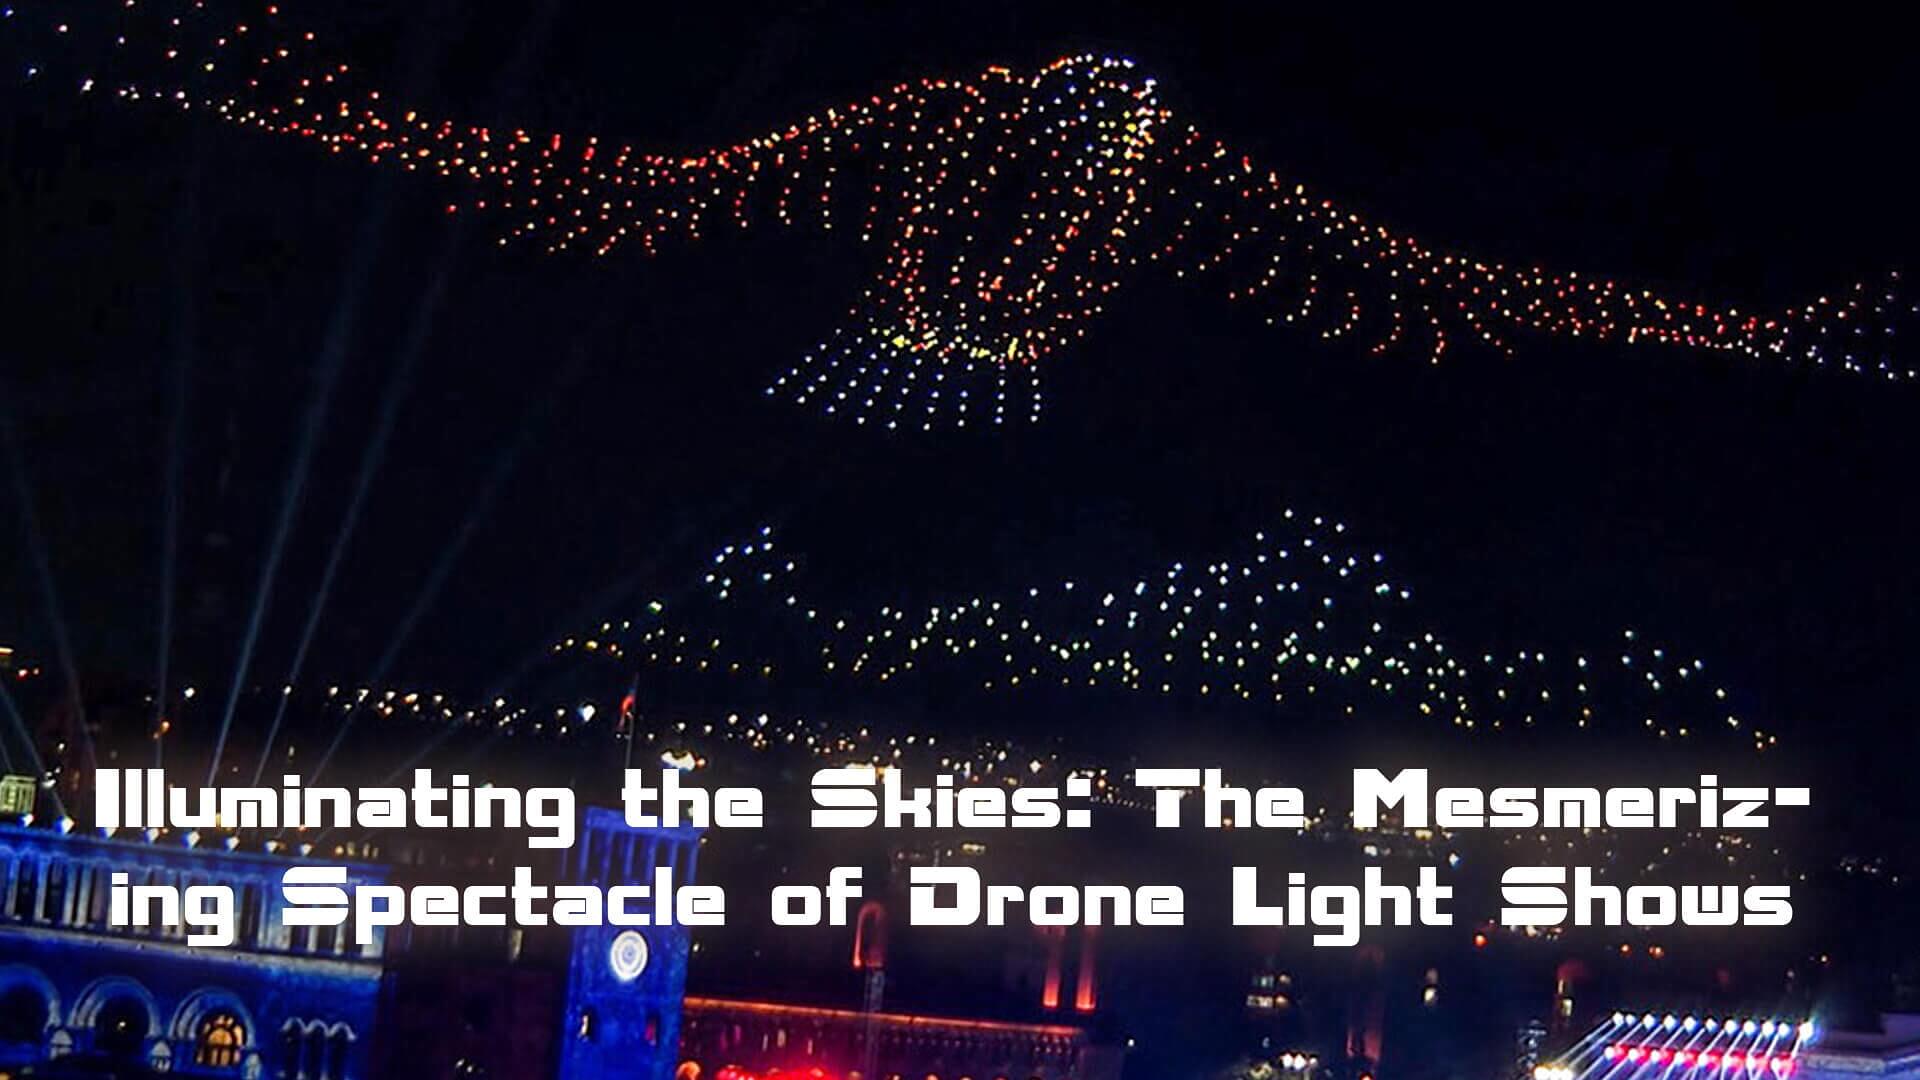 The Mesmerizing Spectacle of Drone Light Shows